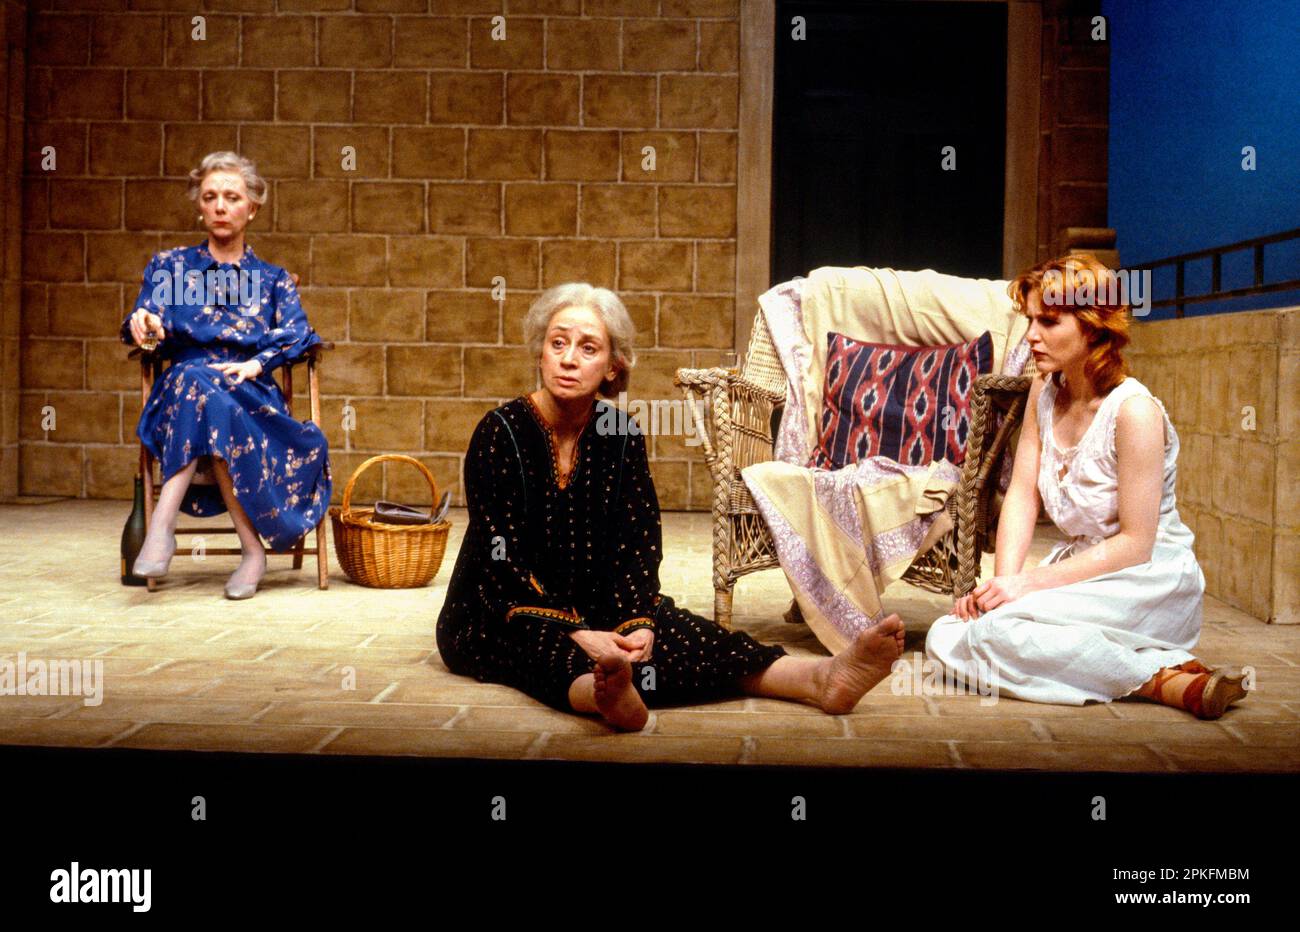 l-r: Anna Massey (Xenia), Yvonne Bryceland (Marthe), Eleanor David (Ann) in SUMMER by Edward Bond at the Cottesloe Theatre, National Theatre (NT), London SE1  27/01/1982  design: Hayden Griffin  lighting: Rory Dempster  director: Edward Bond Stock Photo